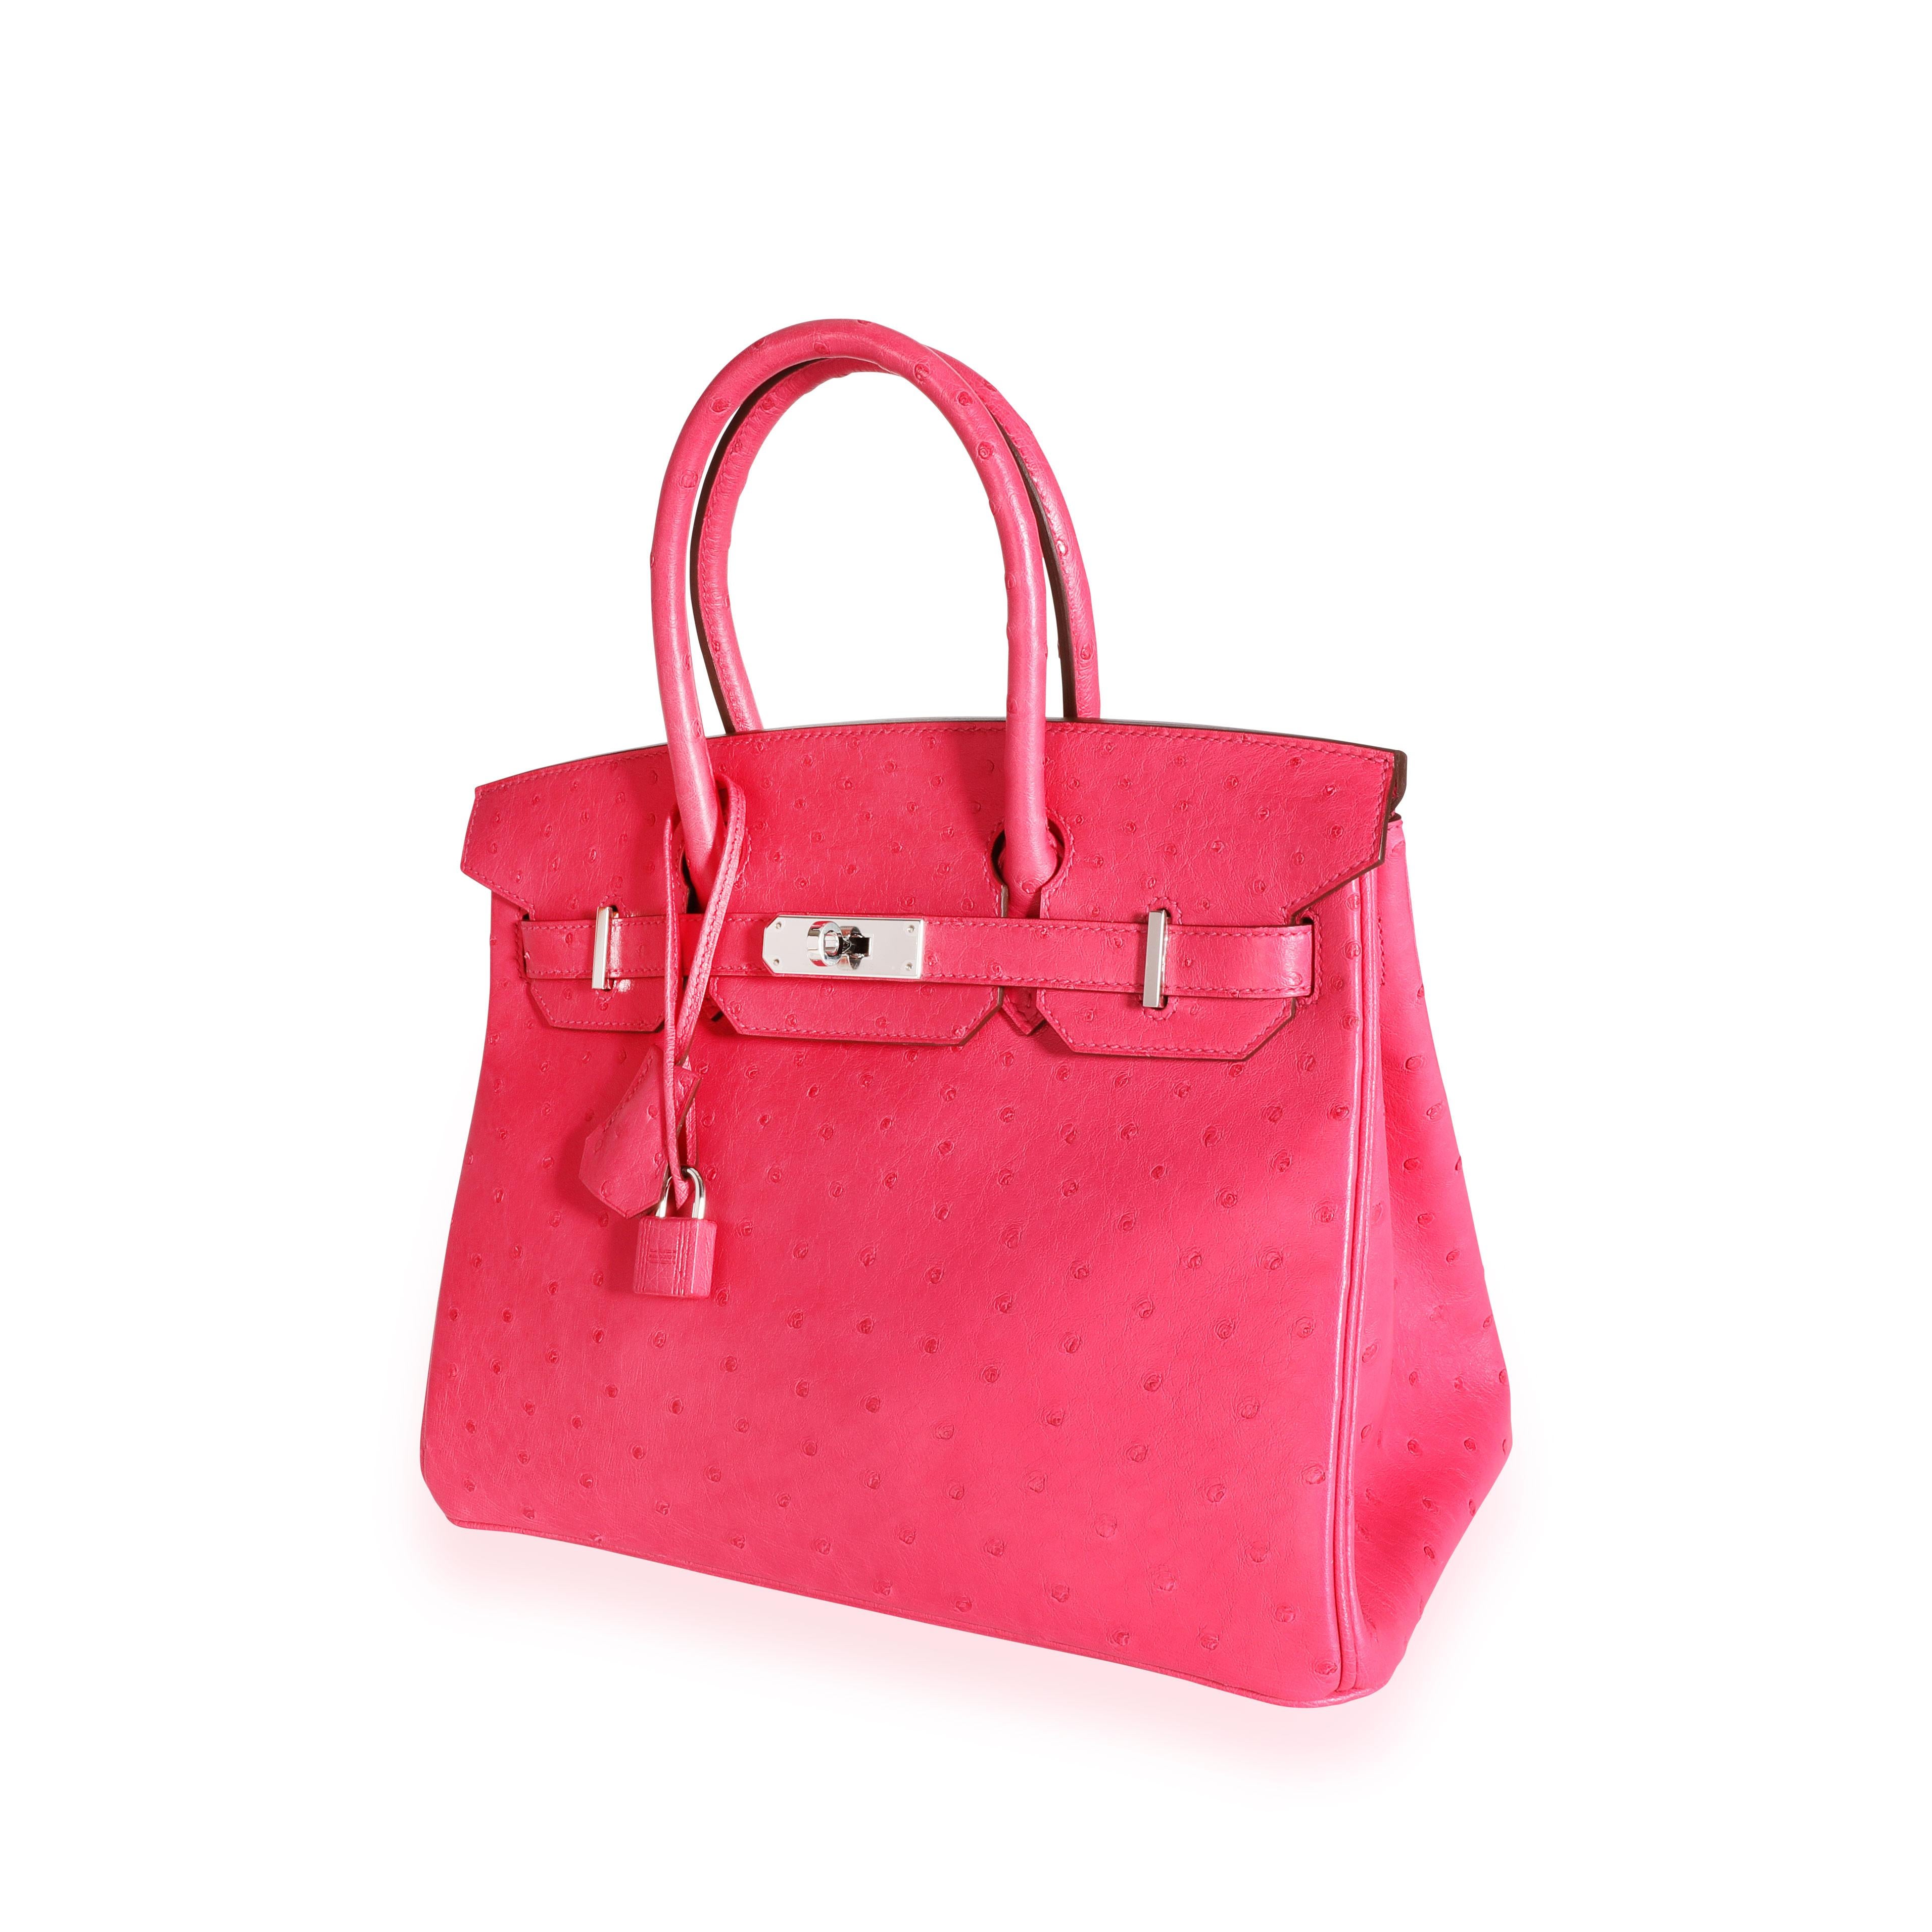 Hermès Rose Tyrien Ostrich Birkin 30 PHW
SKU: 110987

Handbag Condition: Excellent
Condition Comments: Excellent Condition. Plastic on hardware. No visible signs of wear. Please note: this item can not be shipped to all areas.
Brand: Hermès
Model: